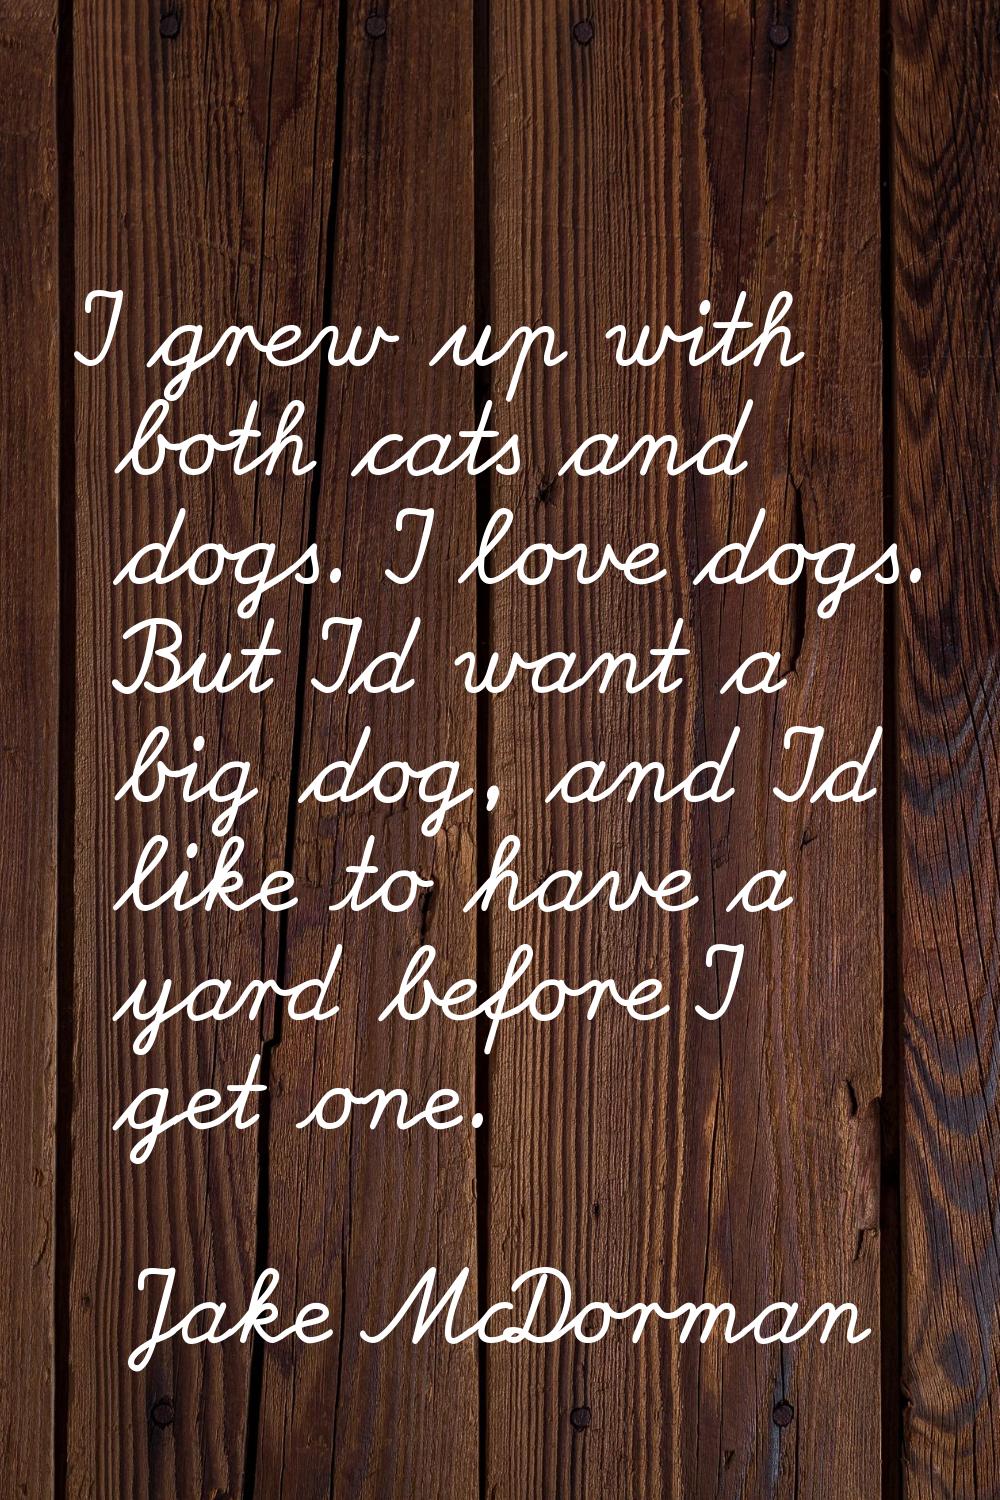 I grew up with both cats and dogs. I love dogs. But I'd want a big dog, and I'd like to have a yard